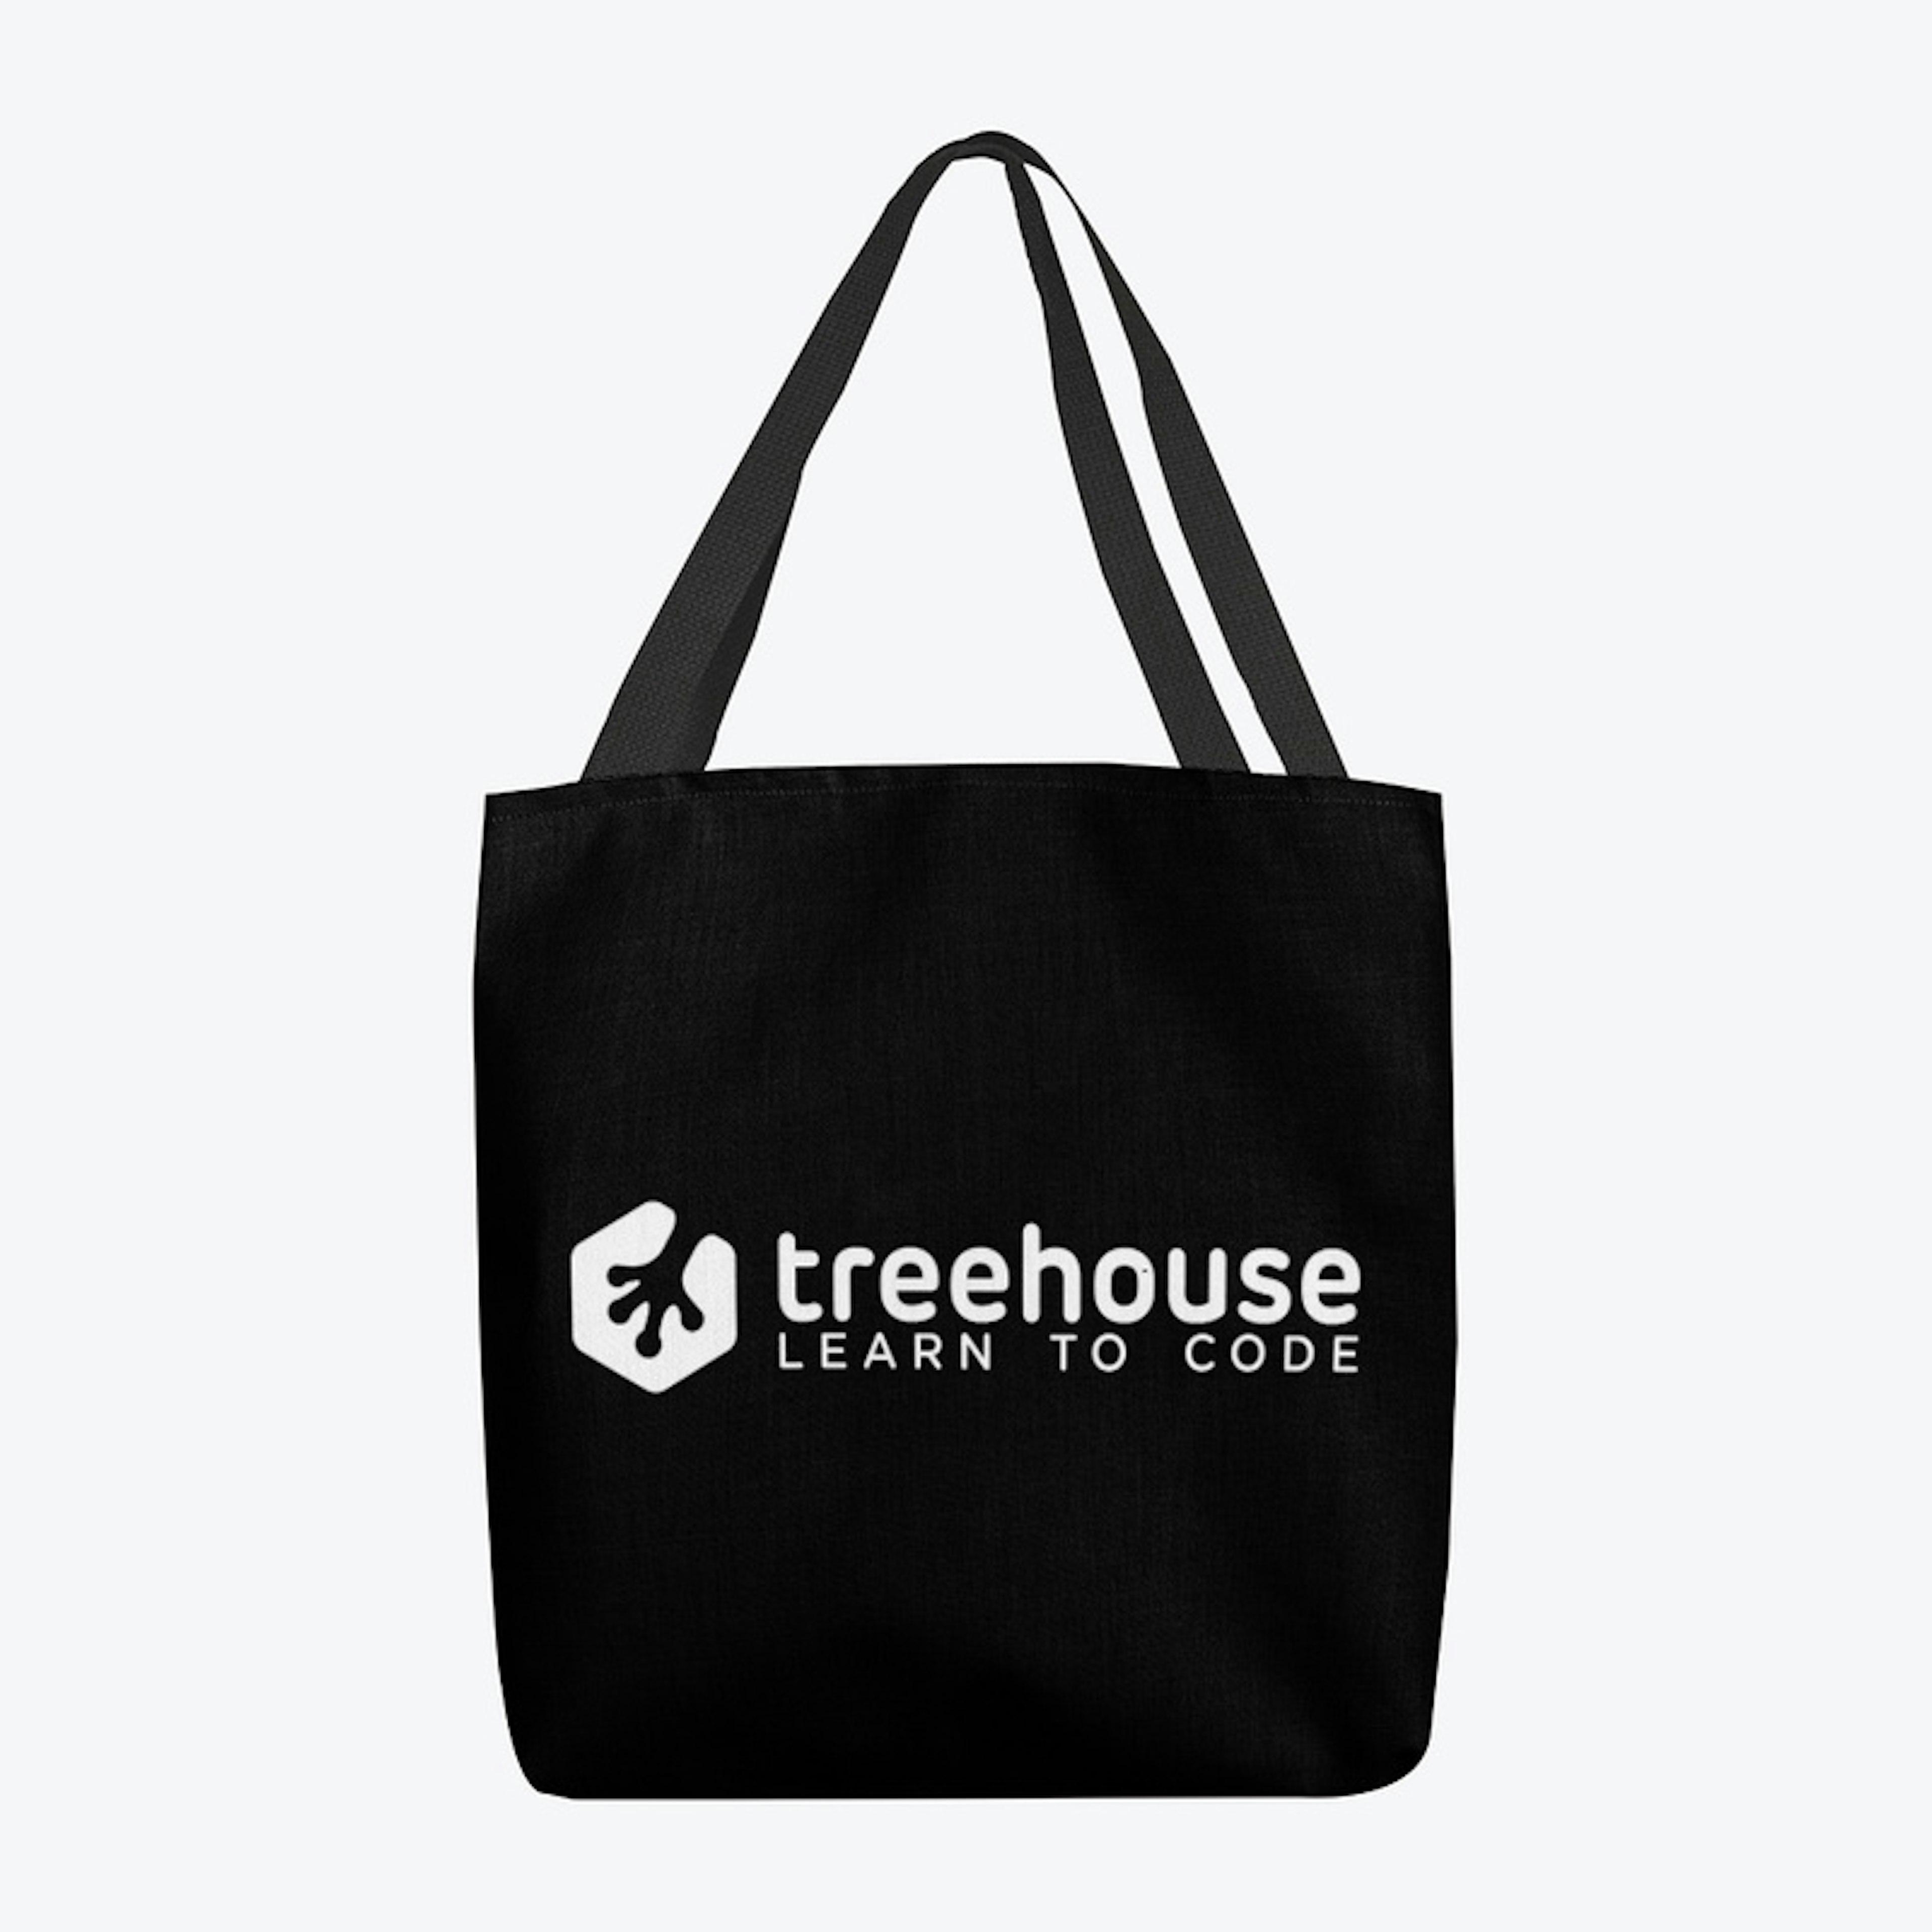 Treehouse - Learn to Code (white)